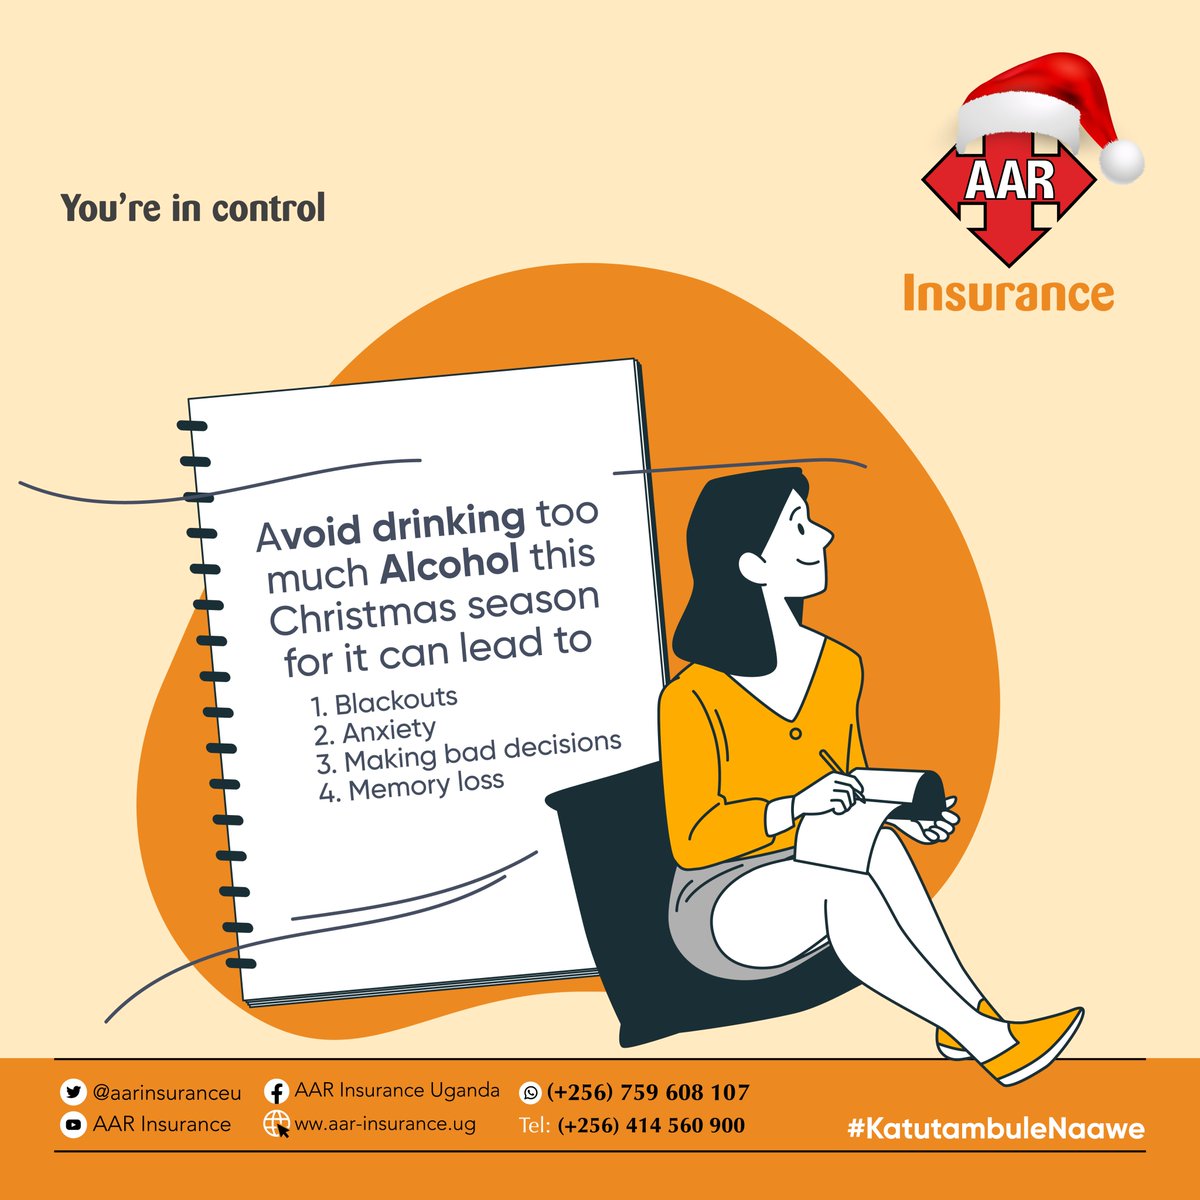 December is largely considered to be a month for parties and celebrations. Studies have found that alcohol consumption is generally at its highest around Christmas and New Year's Day. Be safe and cautious if you will be consuming alcohol during these holidays. 
 #KatutambuleNawe